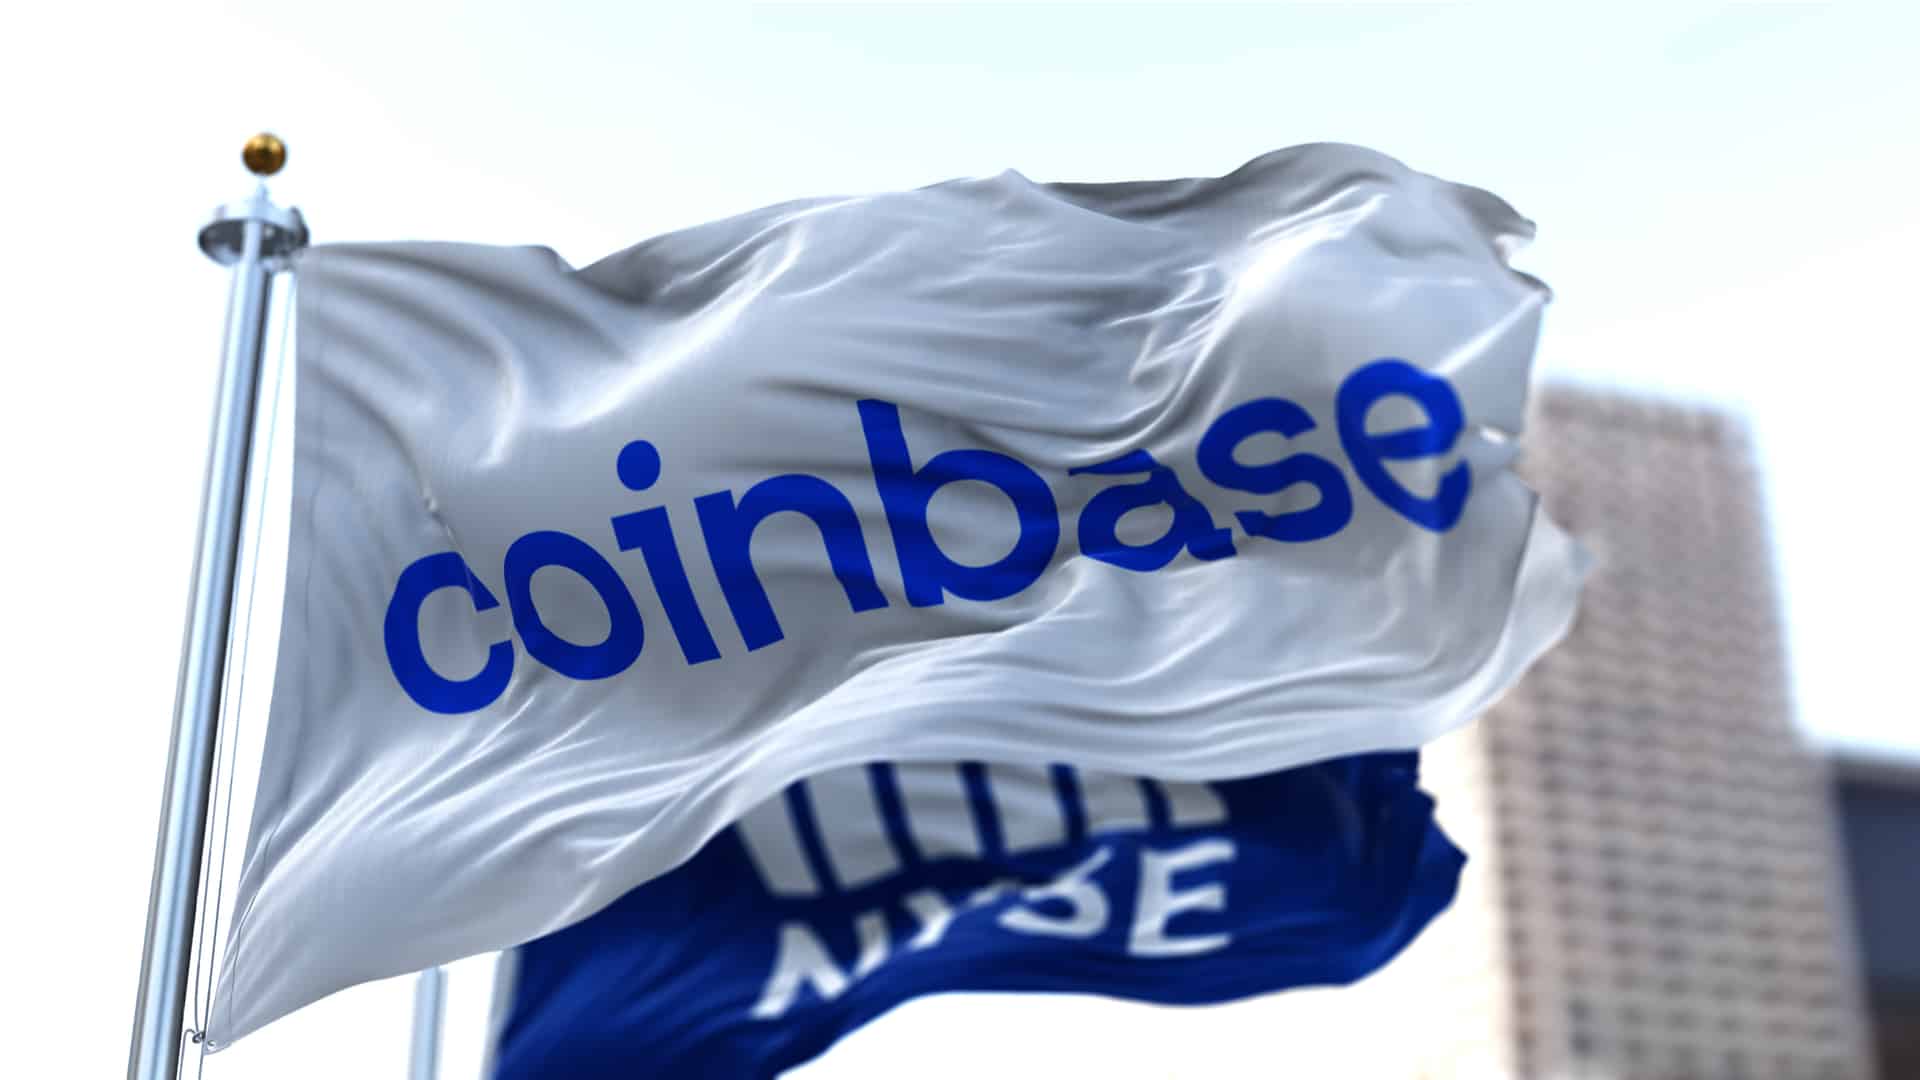 Coinbase client loses 200 BTC as a result of a hacker attack – the exchange is still silent